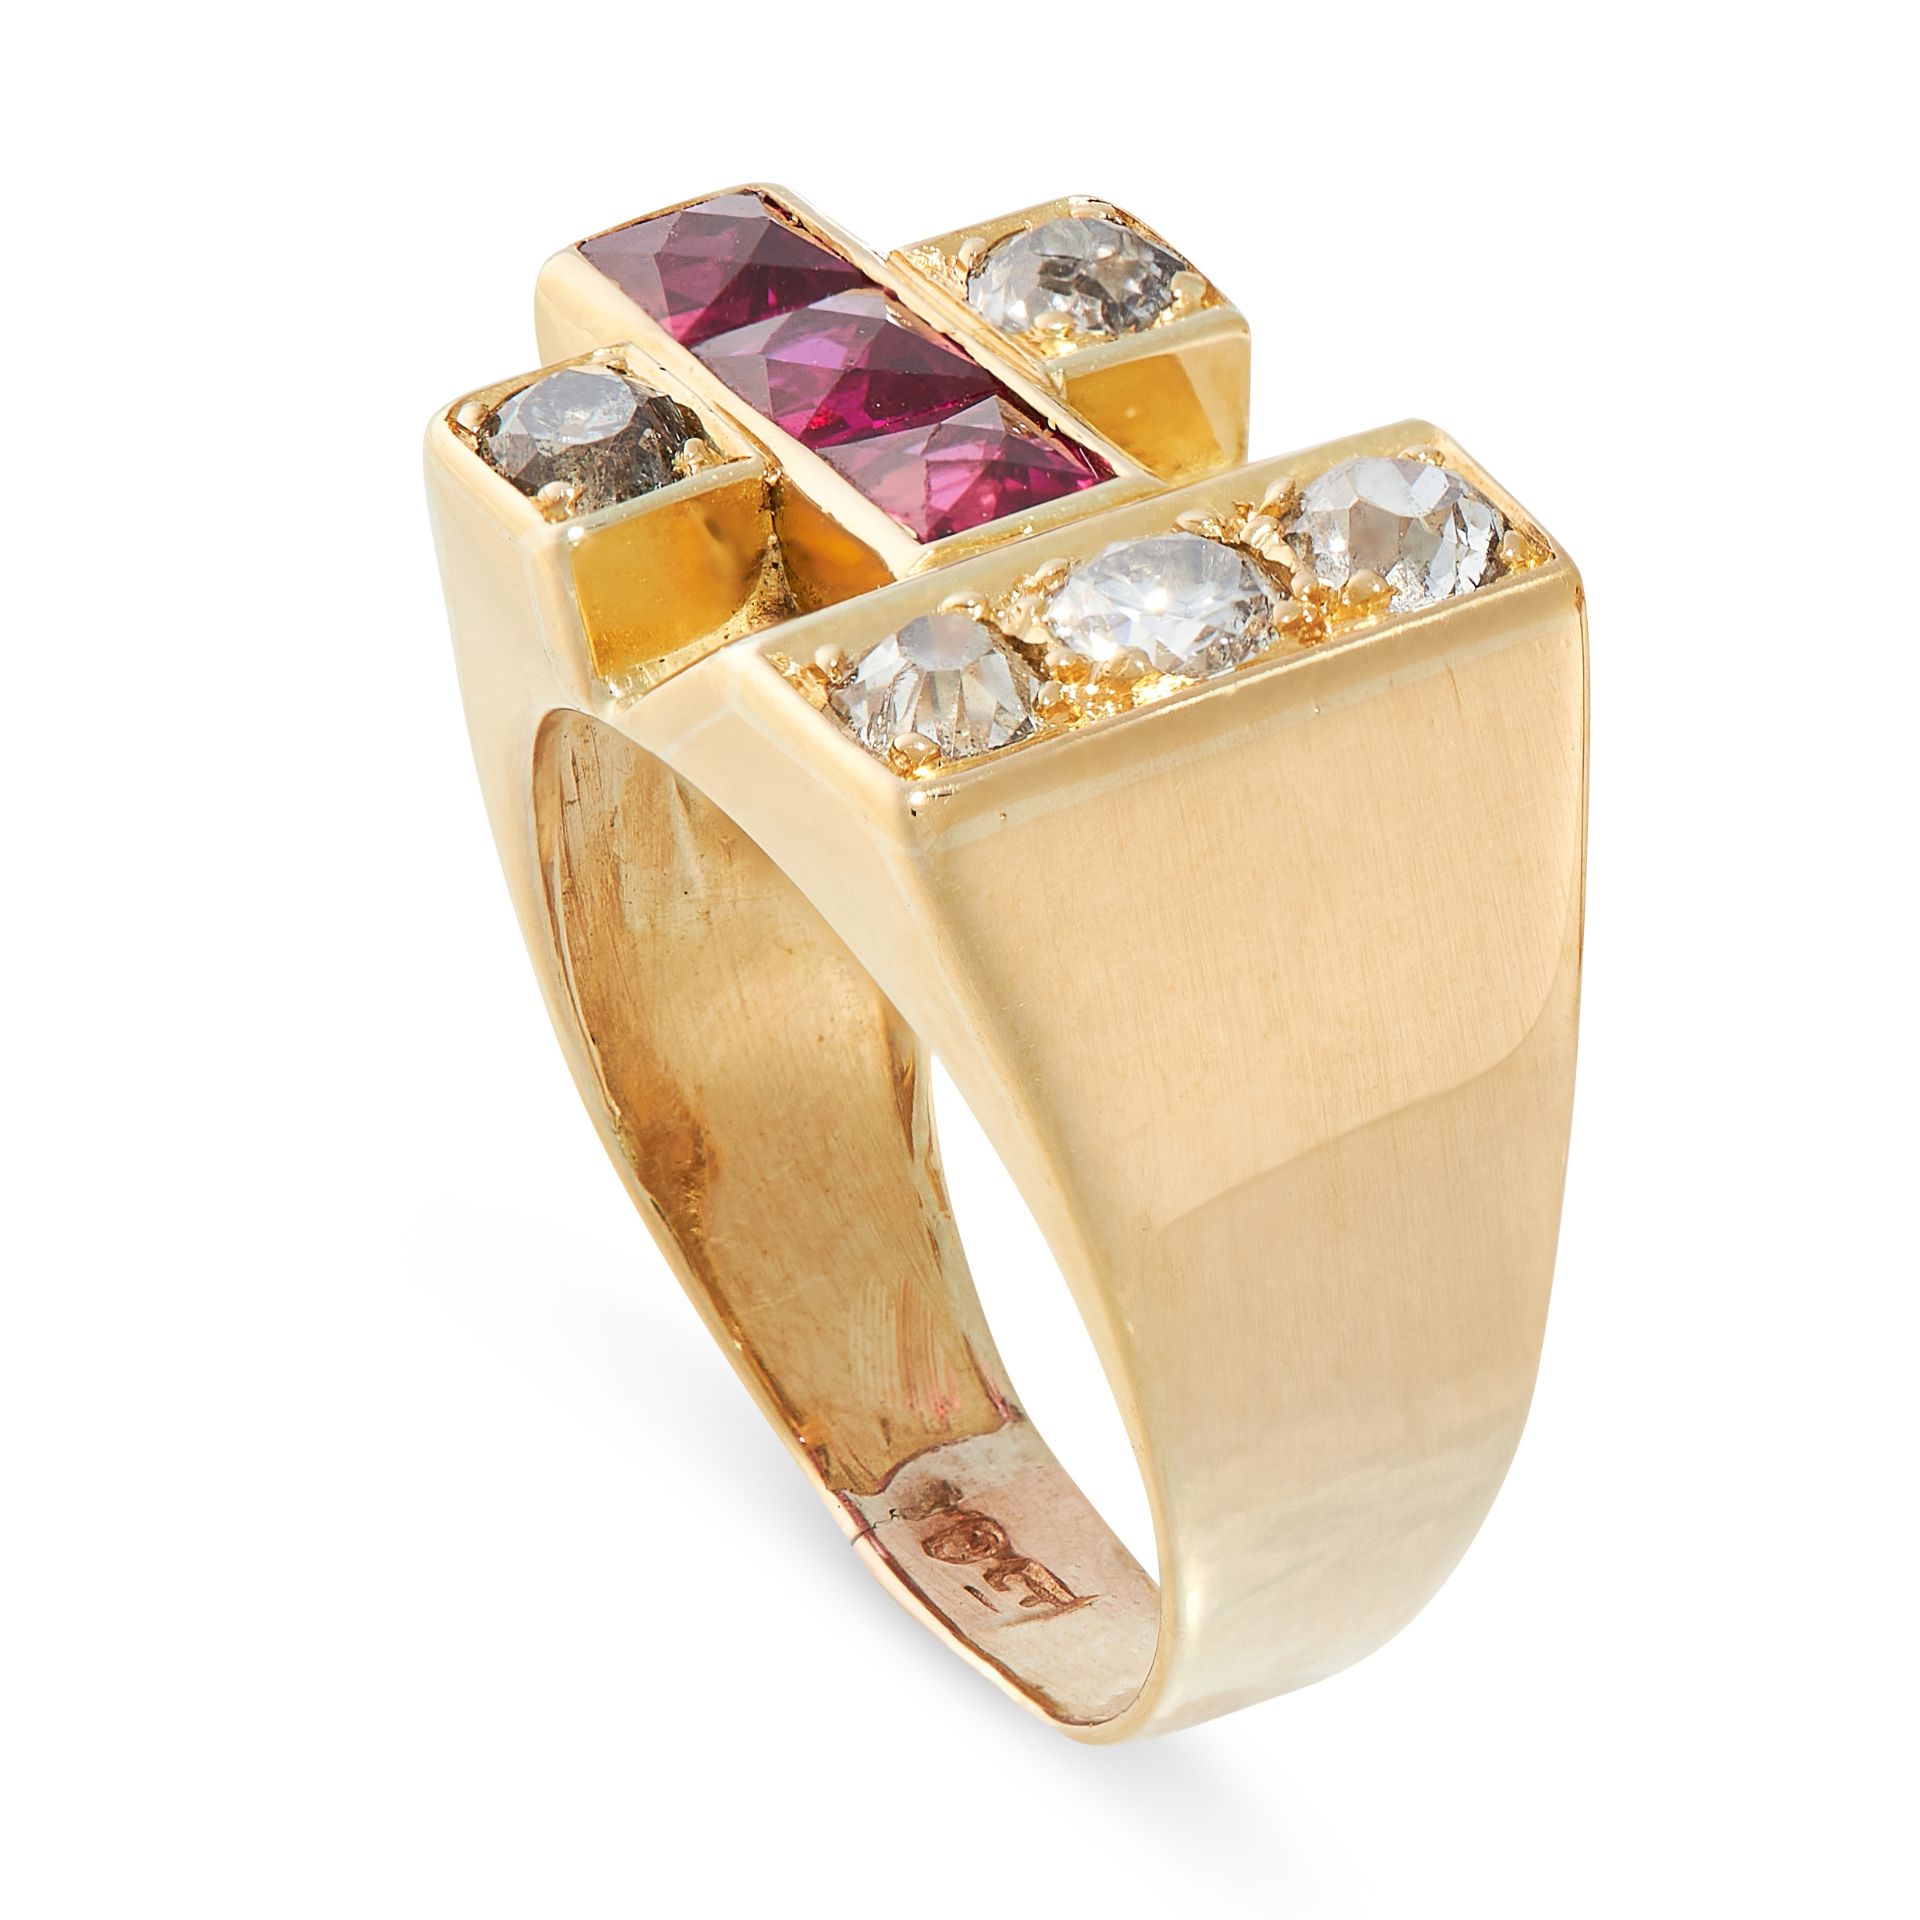 A RETRO DIAMOND AND RUBY RING in 18ct yellow gold, set with three French cut synthetic rubies and - Image 2 of 2